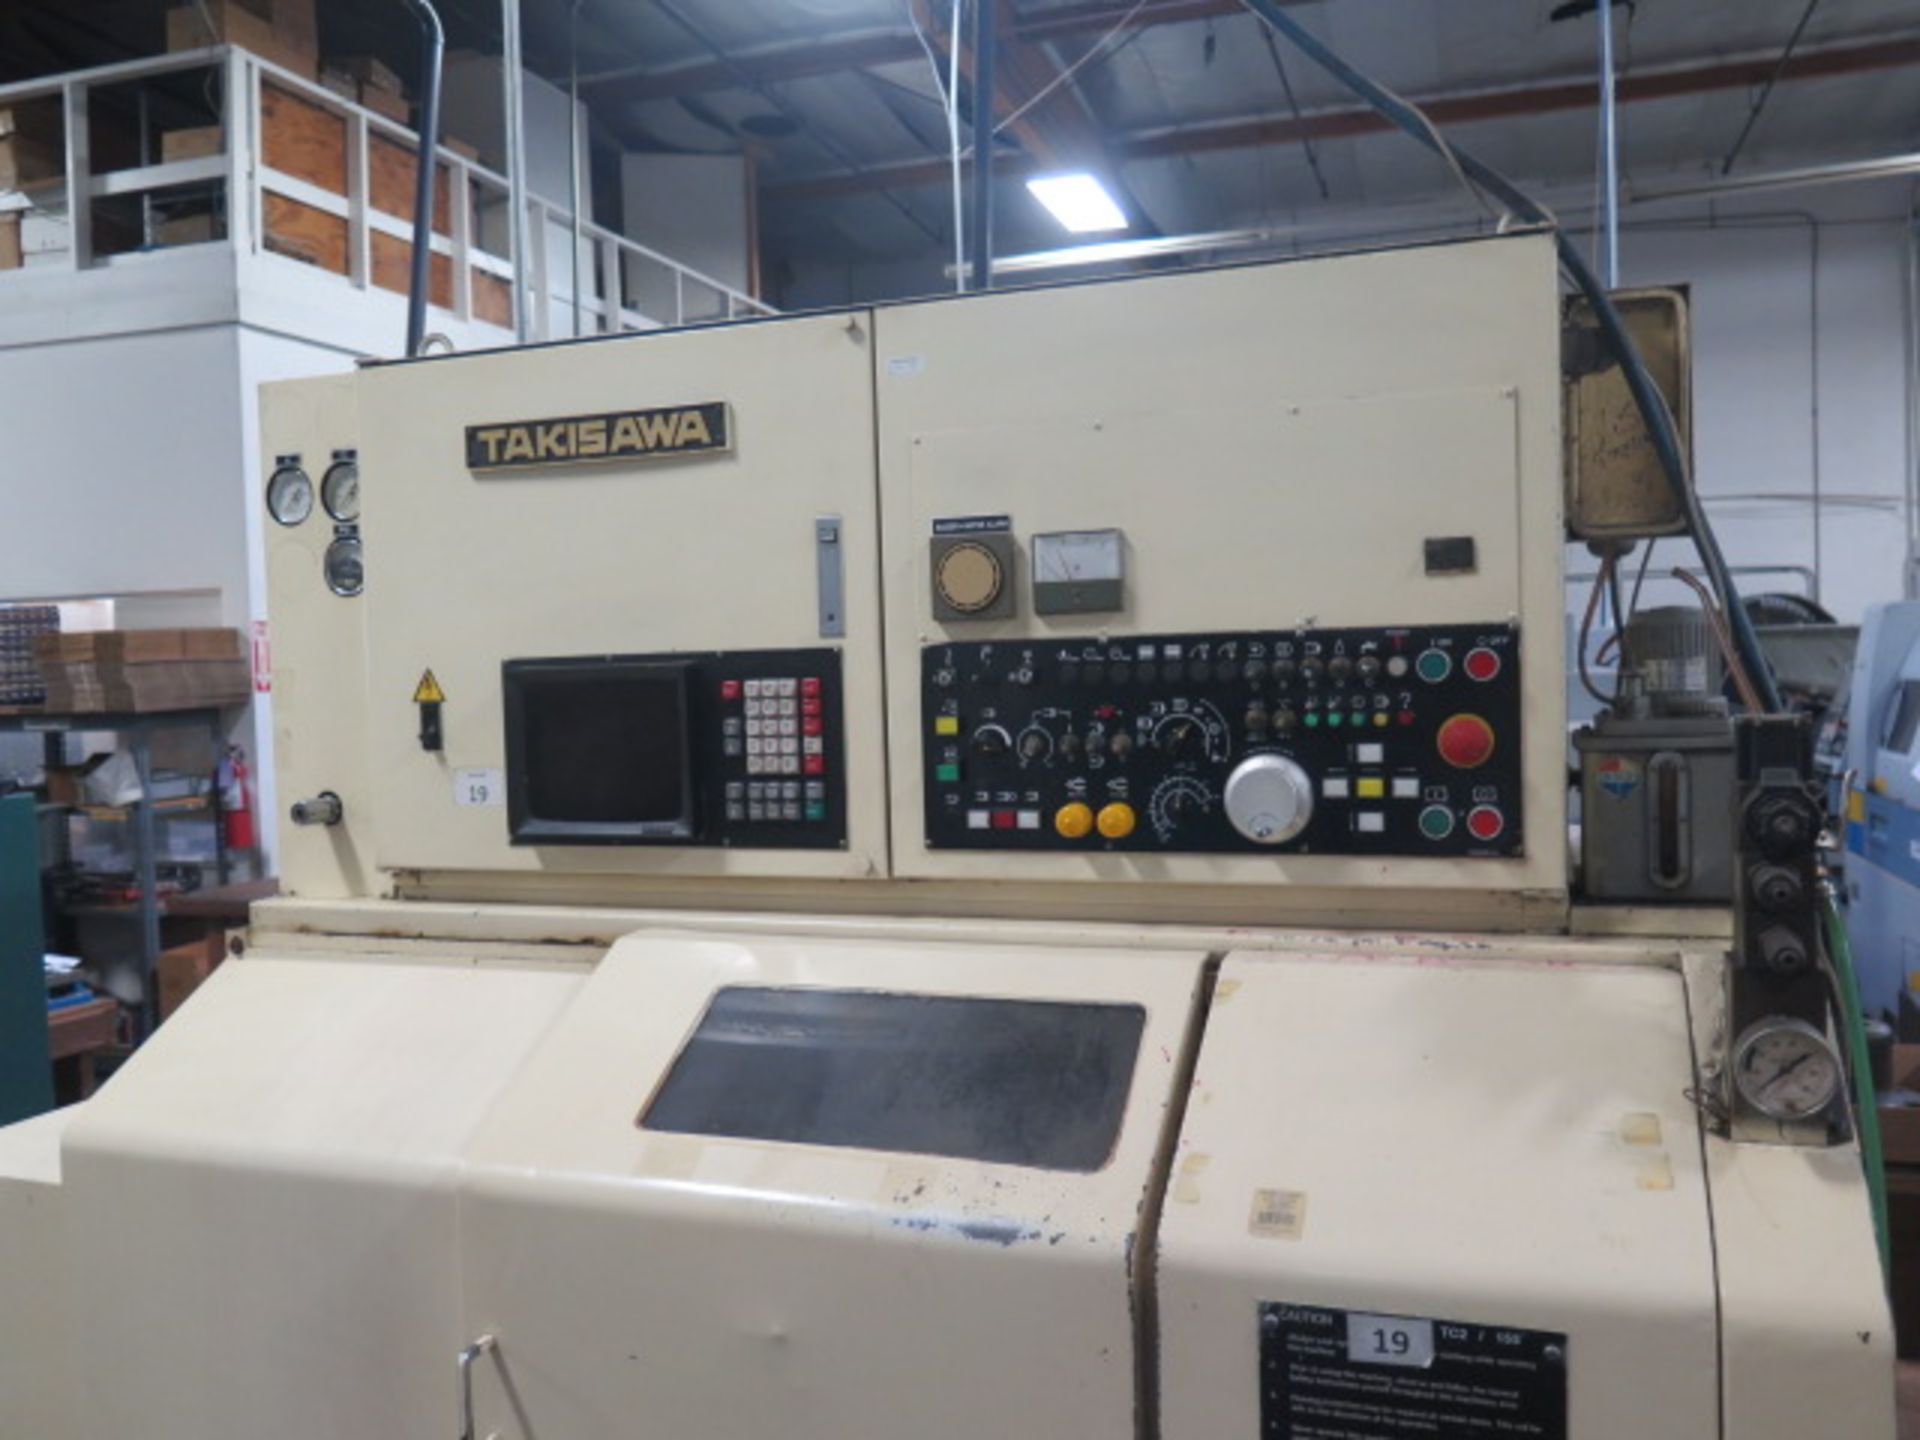 Takisawa TC-2 CNC Turning Center s/n THRDR-4431 w/ Fanuc Controls, 6-Station Turret, SOLD AS IS - Image 3 of 16